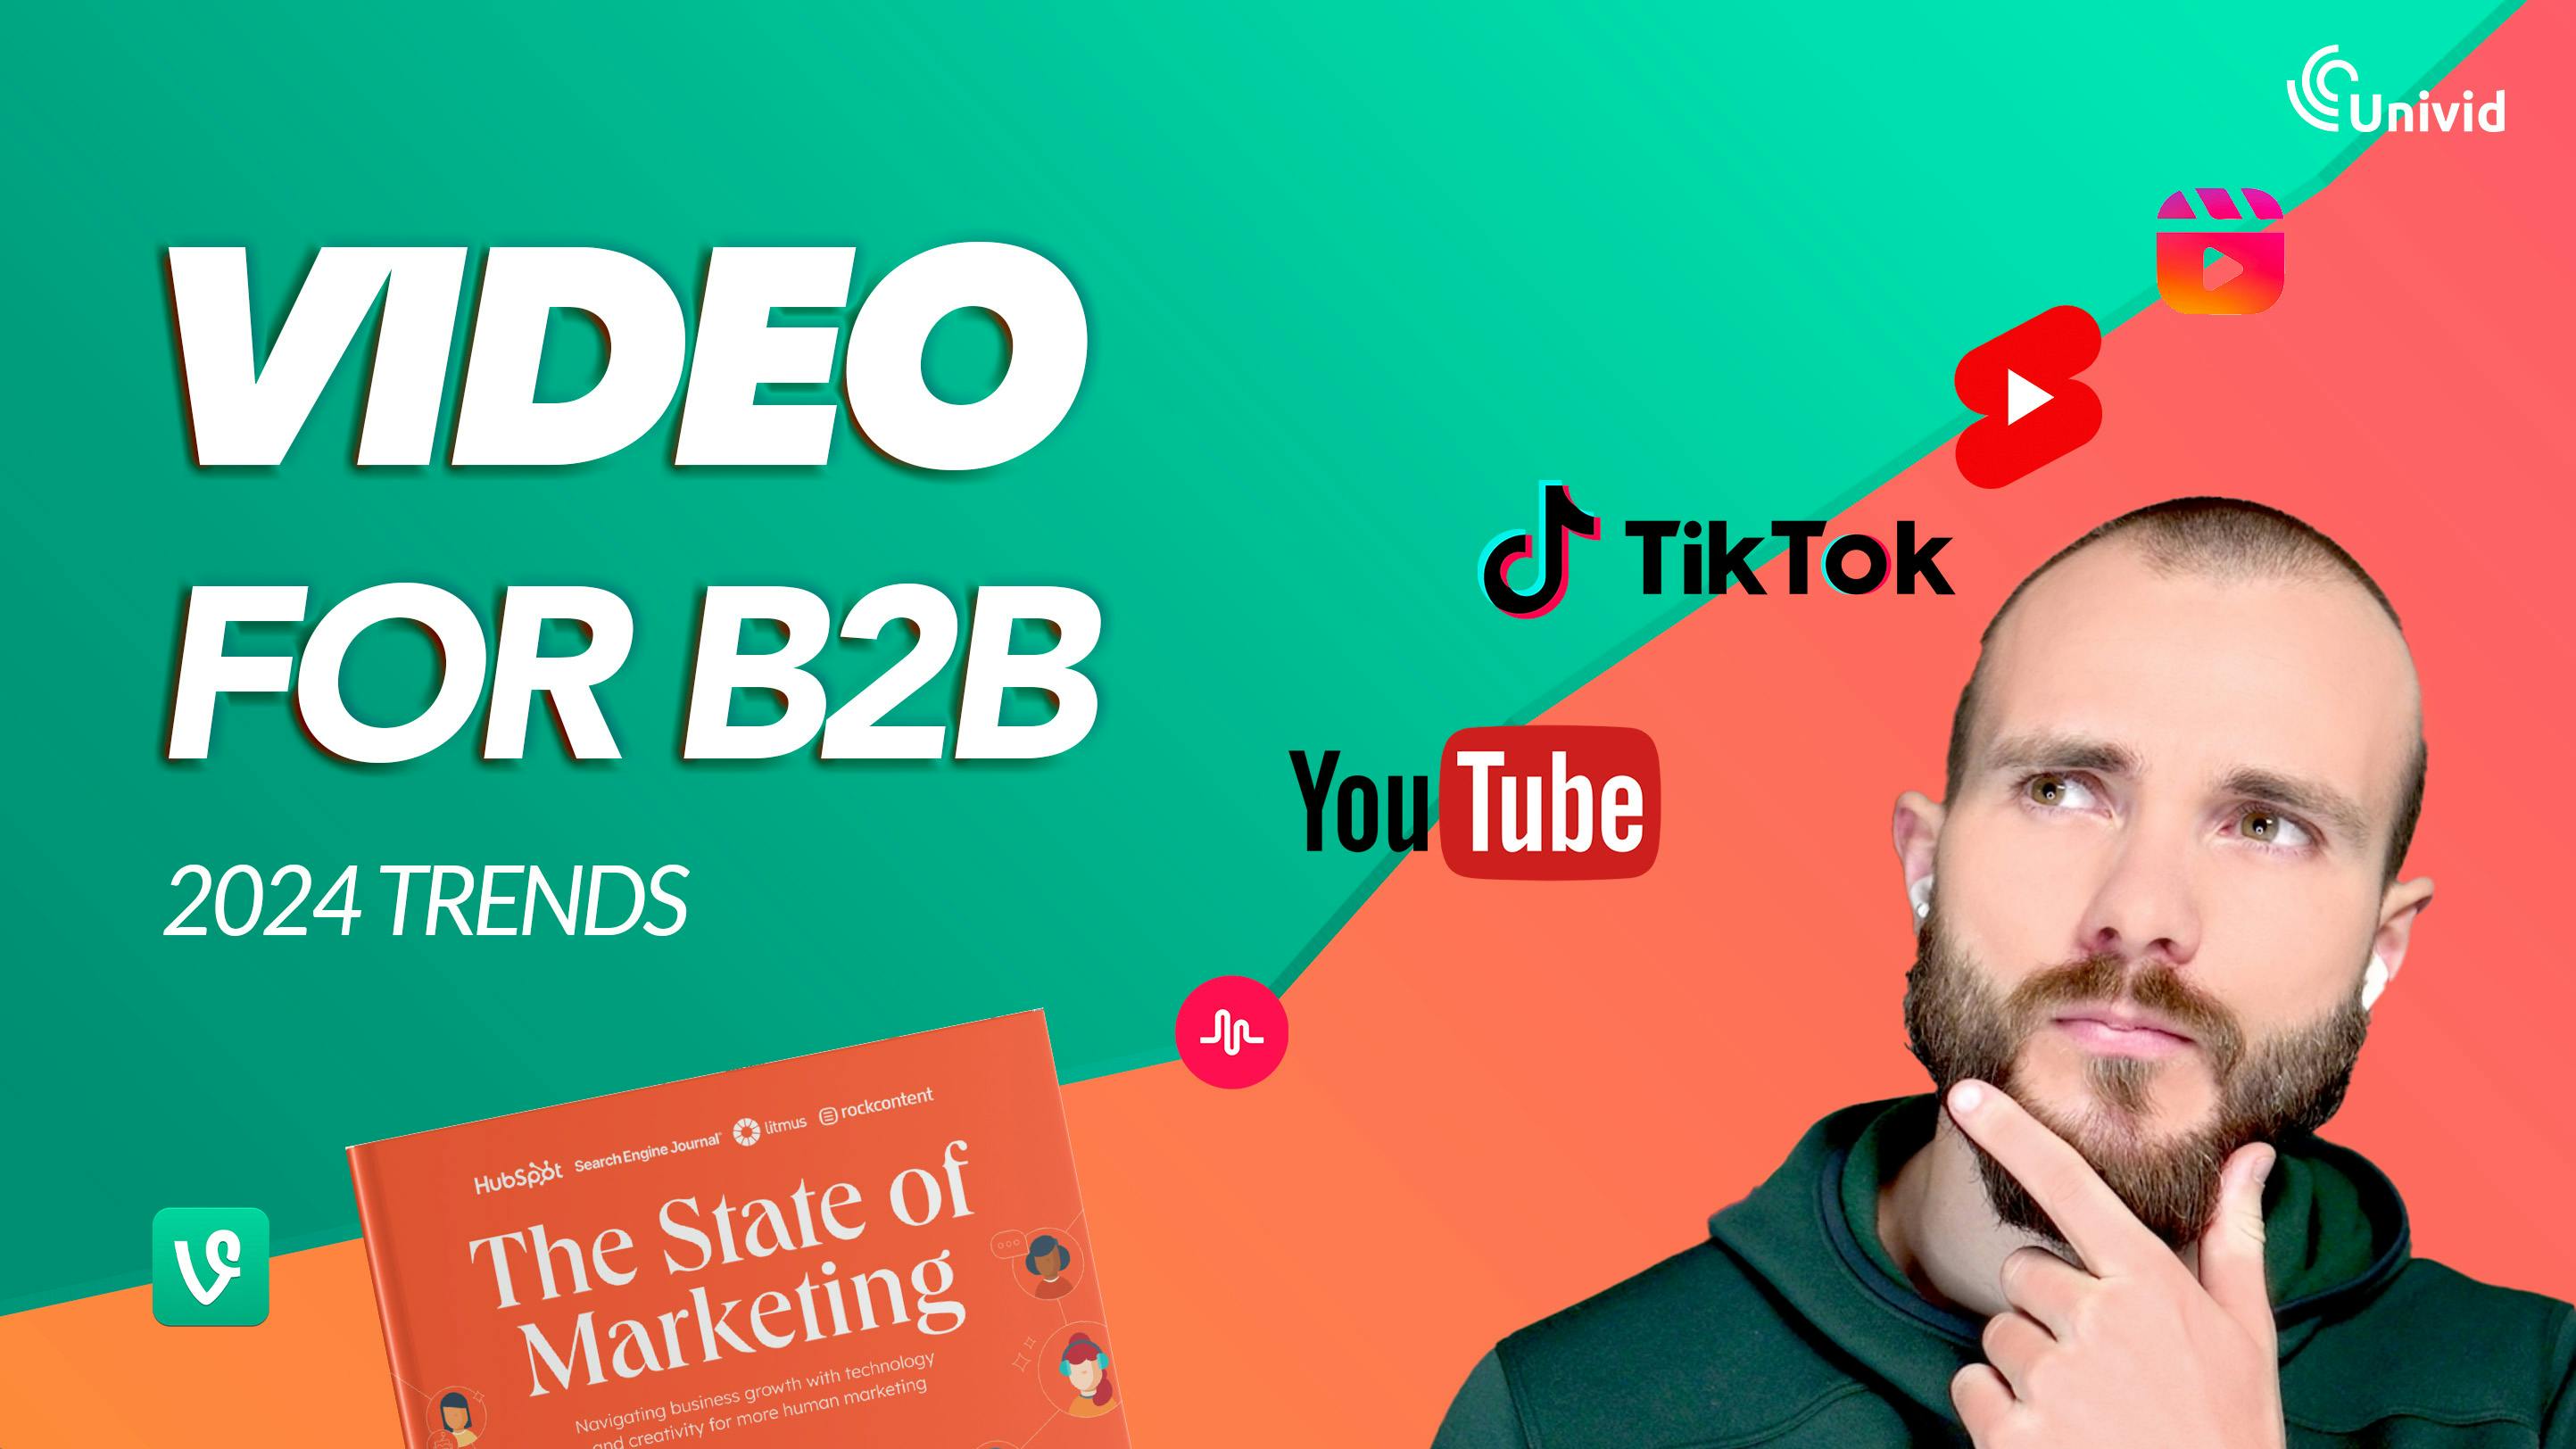 3 Video Marketing Trends in 2024: How to use video to grow B2B SaaS